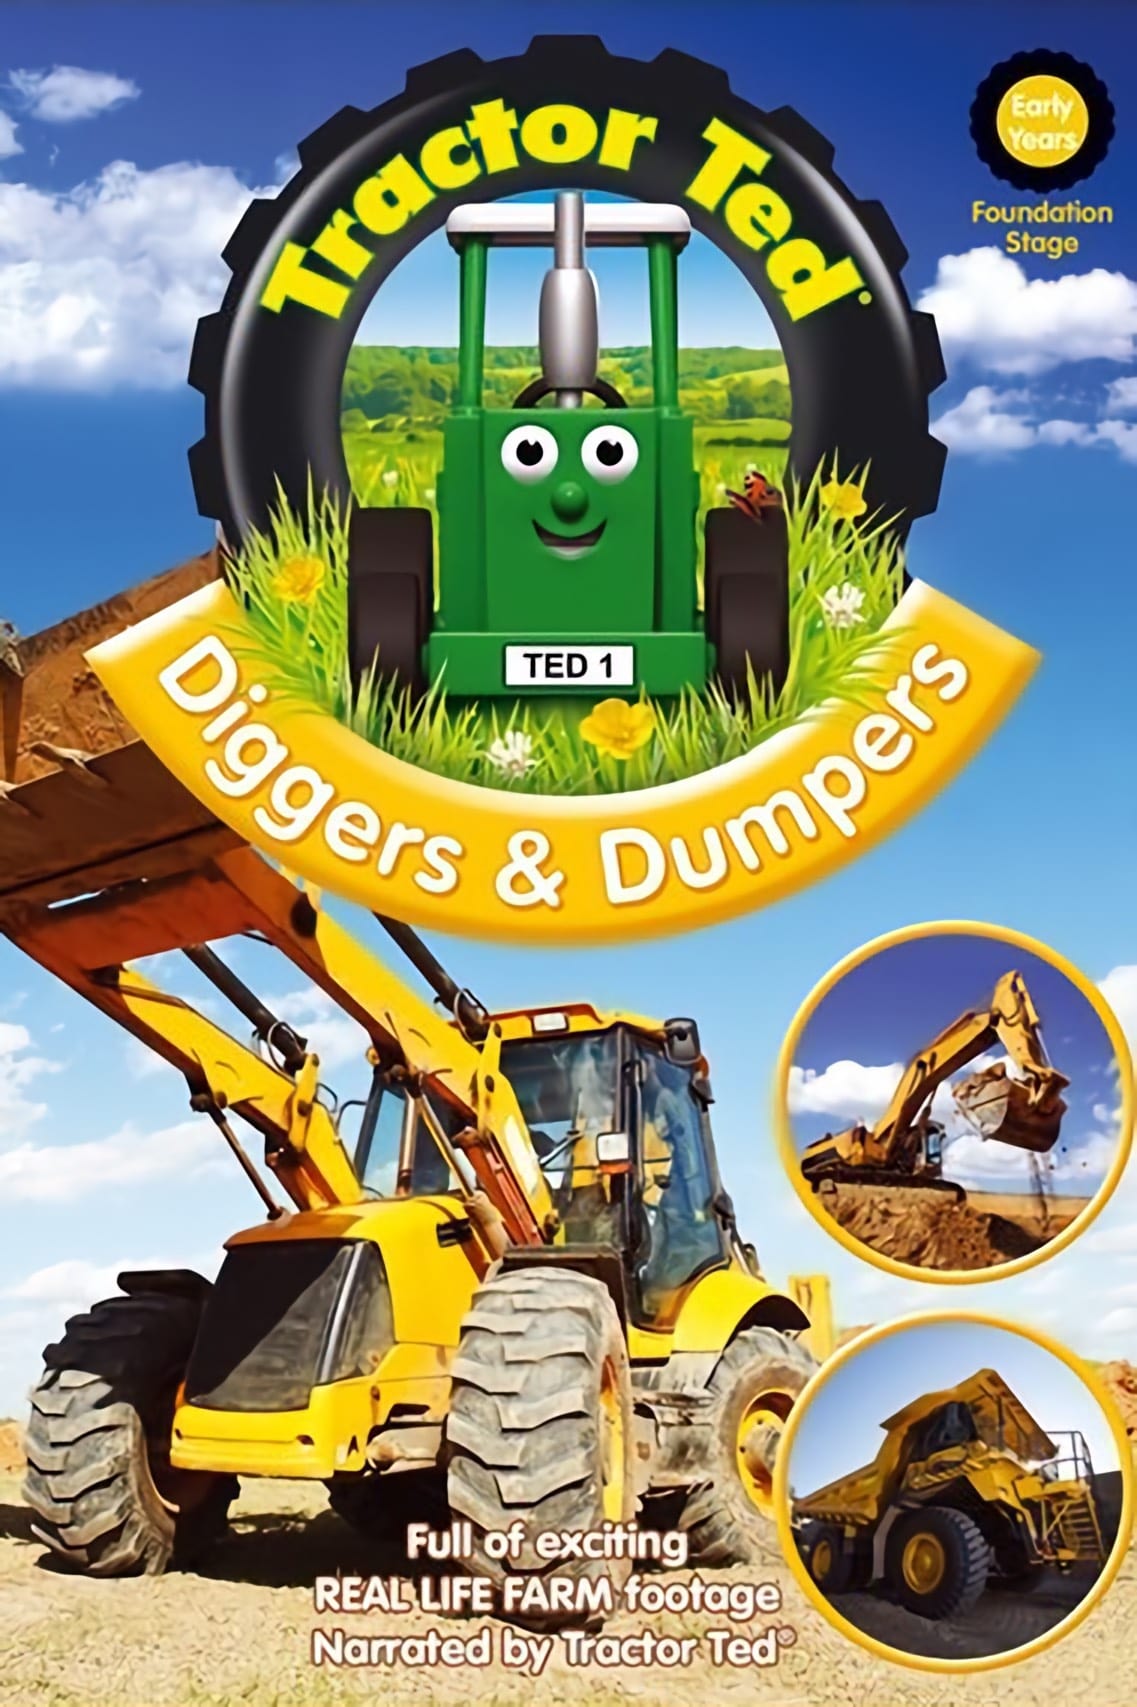 Tractor Ted Diggers and Dumpers